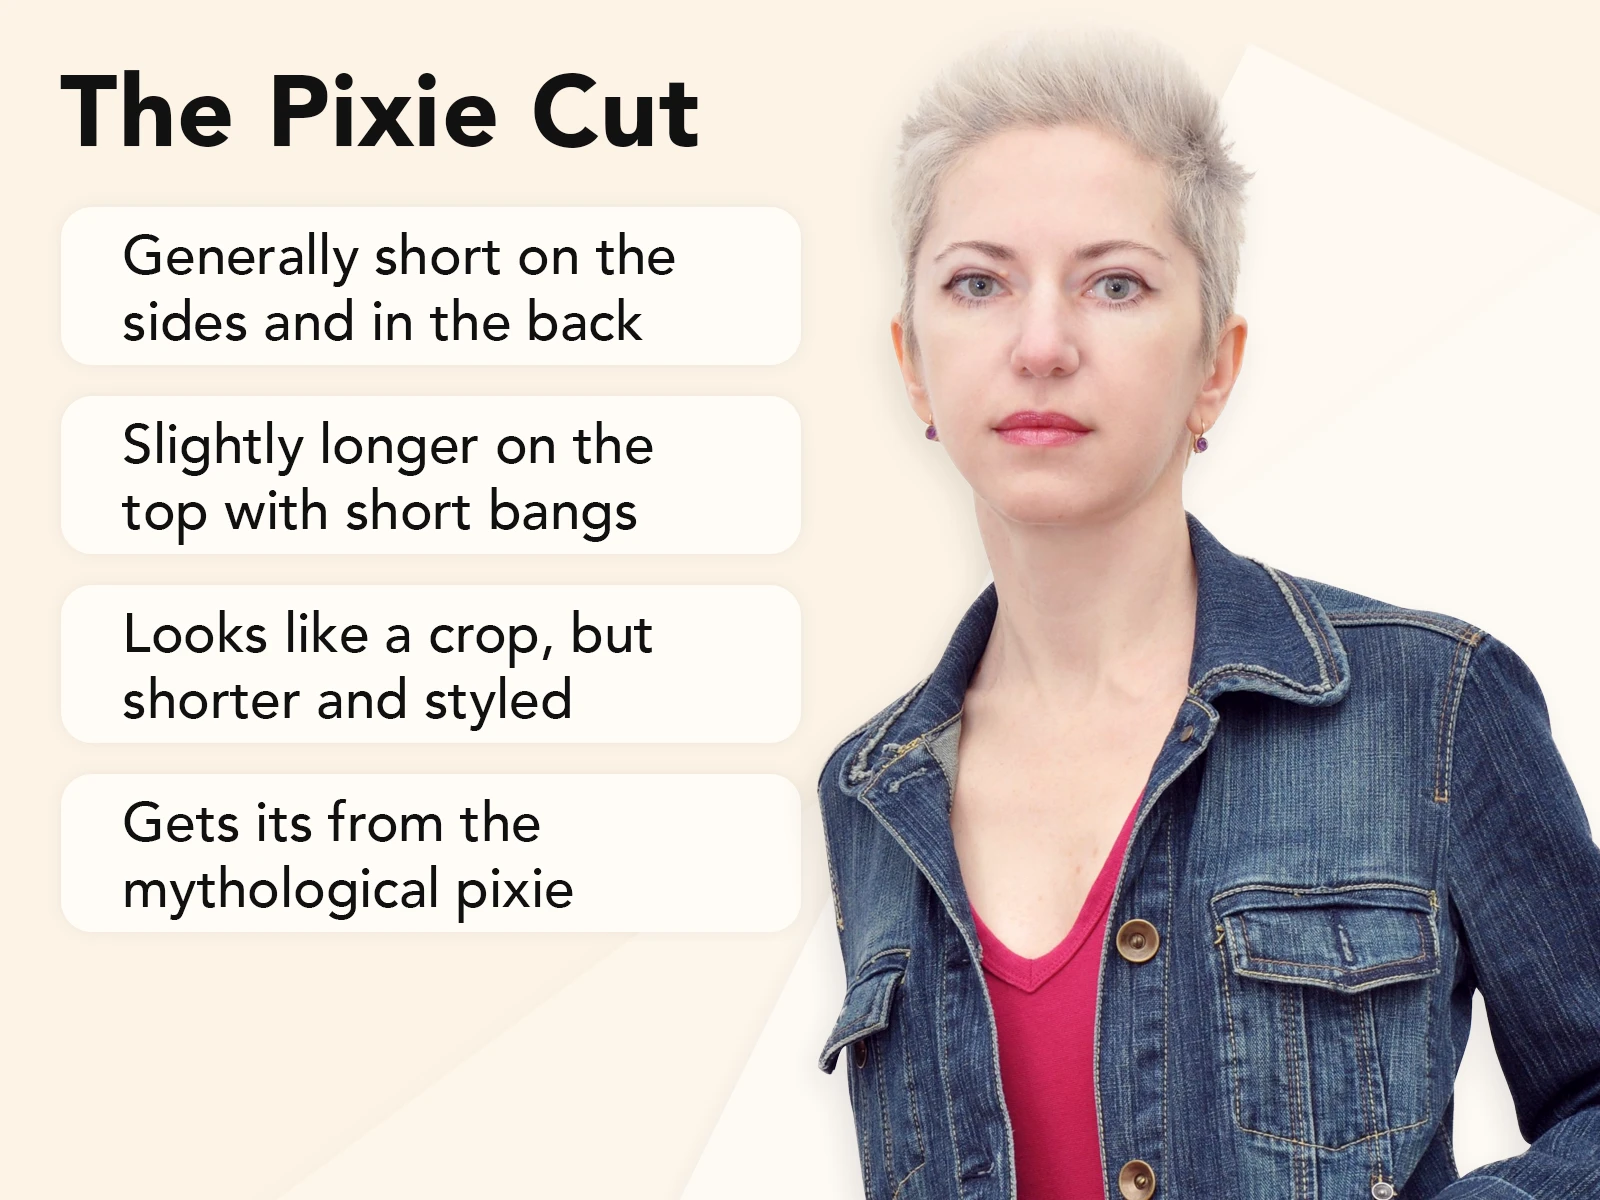 Pixie cut explainer image with key traits and an example on a tan background